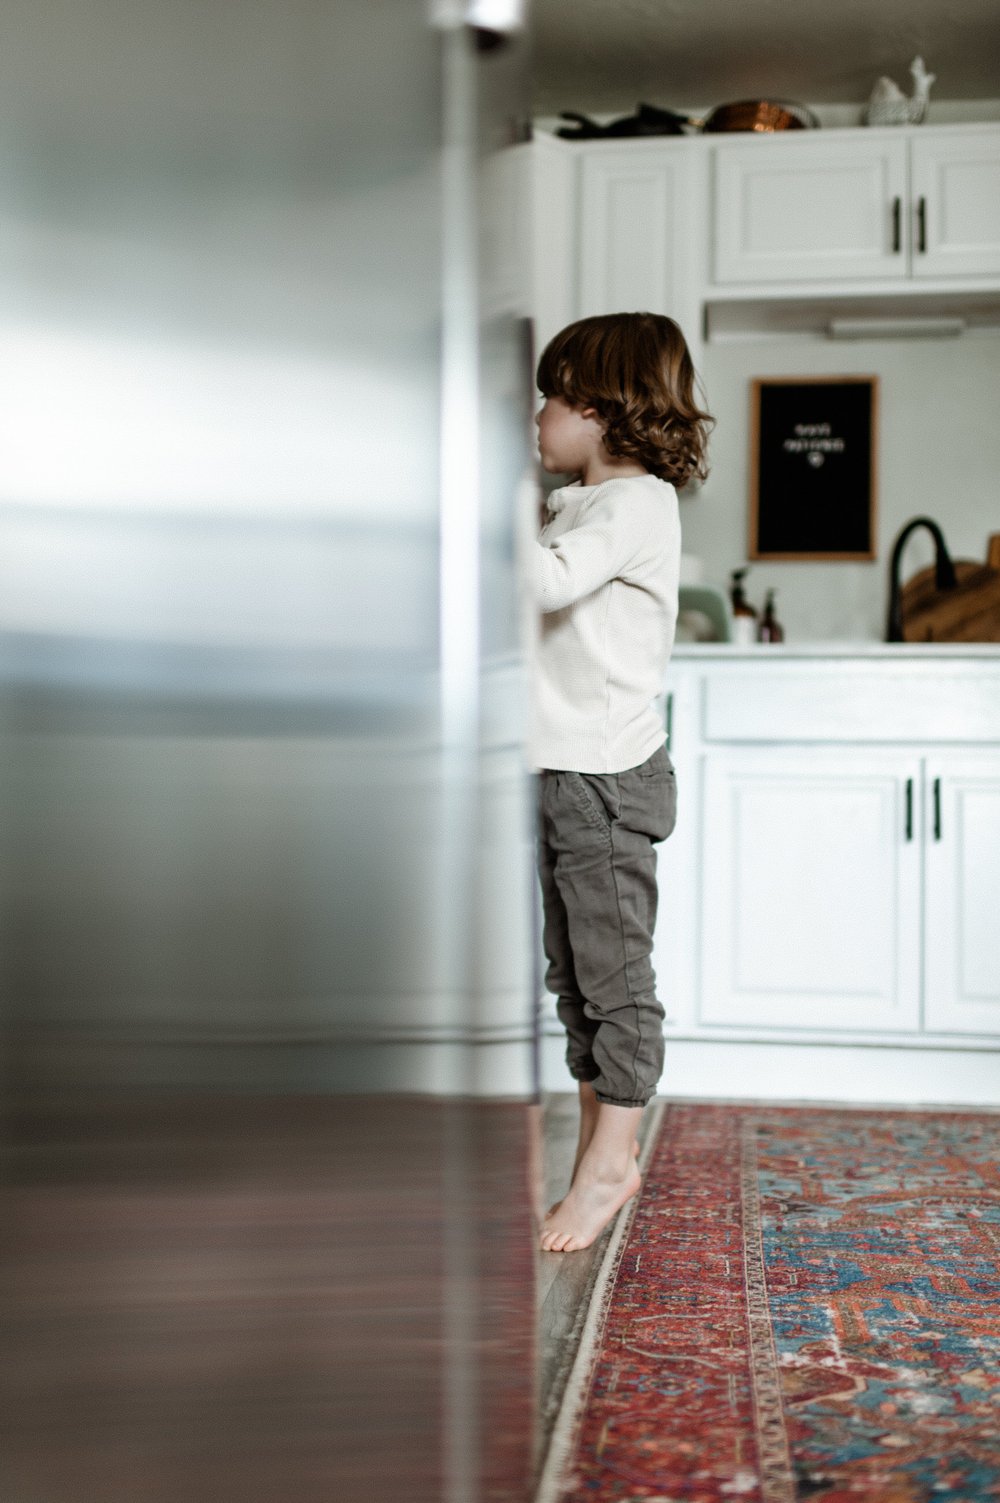 toddler boy on tiptoes reaching for something in kitchen cabinet